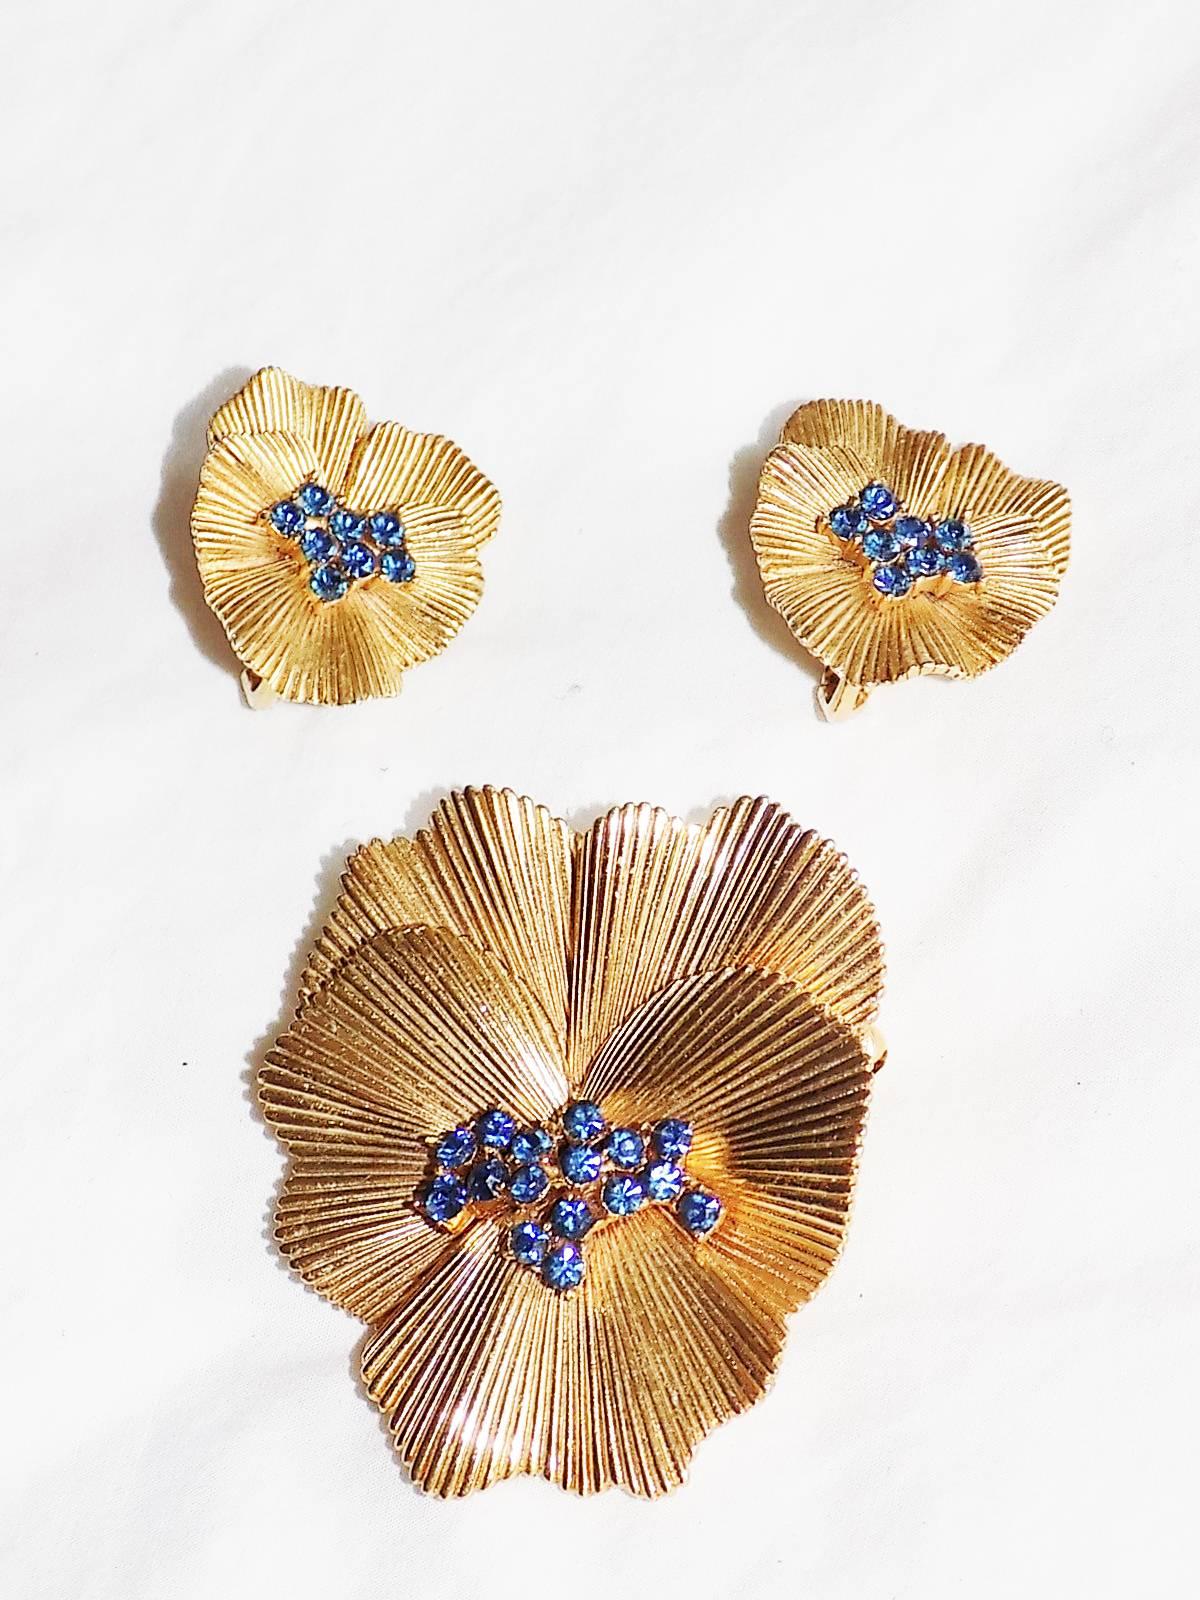  TRIFARI  Pansy Brooch and Earrings in Ridged Gold with blue stones at Center. Ca.1950s. Pristine condition, like new. Clip on Earrings. Pin is 2